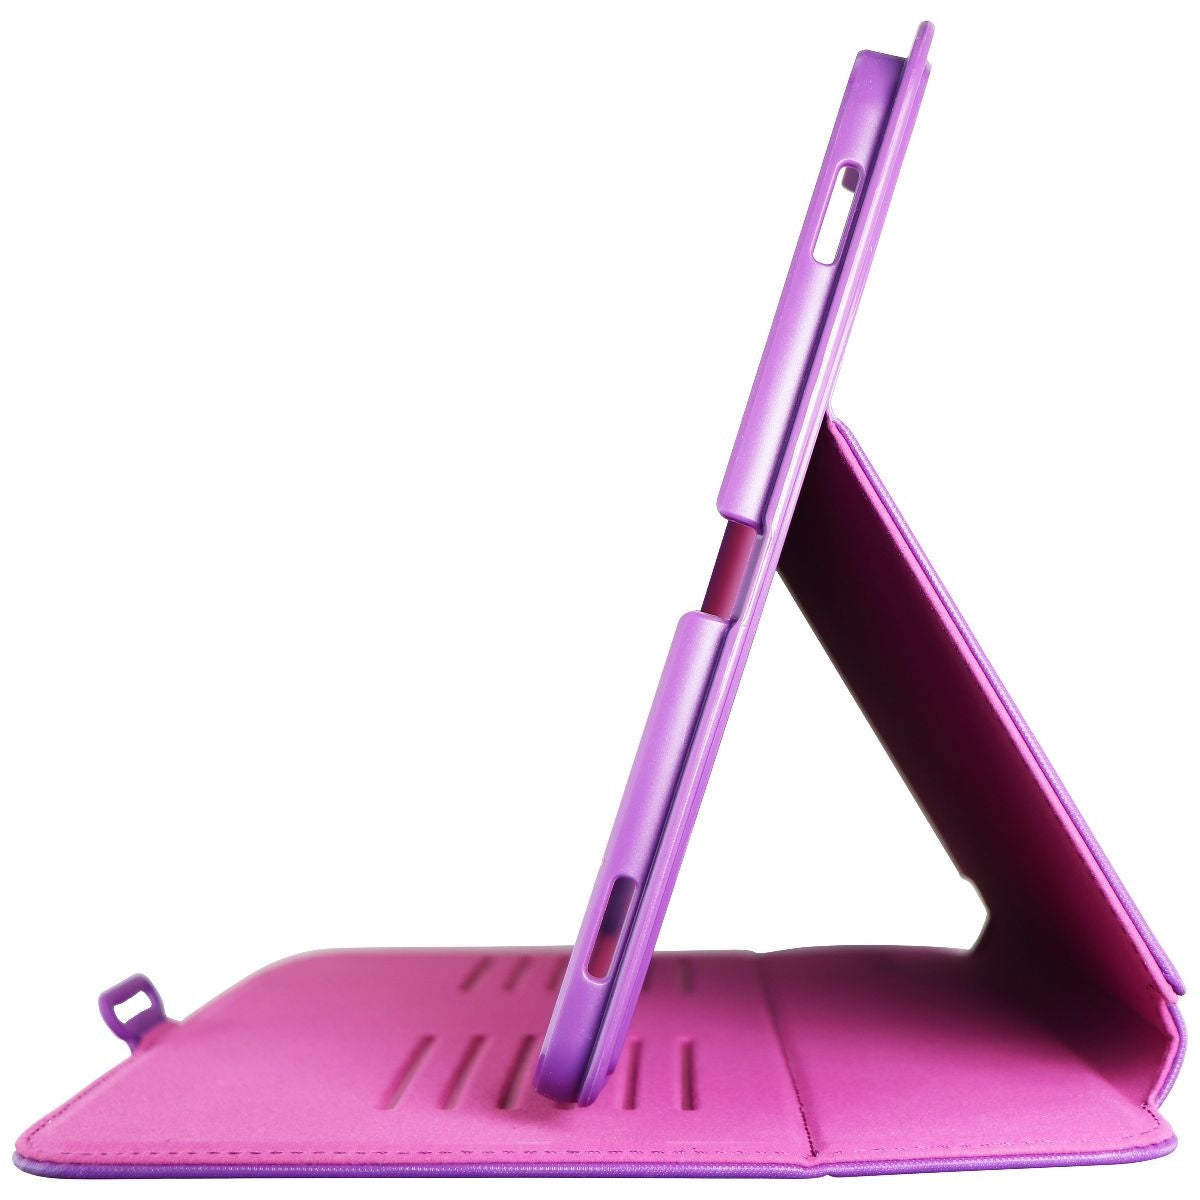 Speck Balance Folio Case for Samsung Galaxy Tab S6 - Acai Purple/Magenta Pink iPad/Tablet Accessories - Cases, Covers, Keyboard Folios Speck    - Simple Cell Bulk Wholesale Pricing - USA Seller